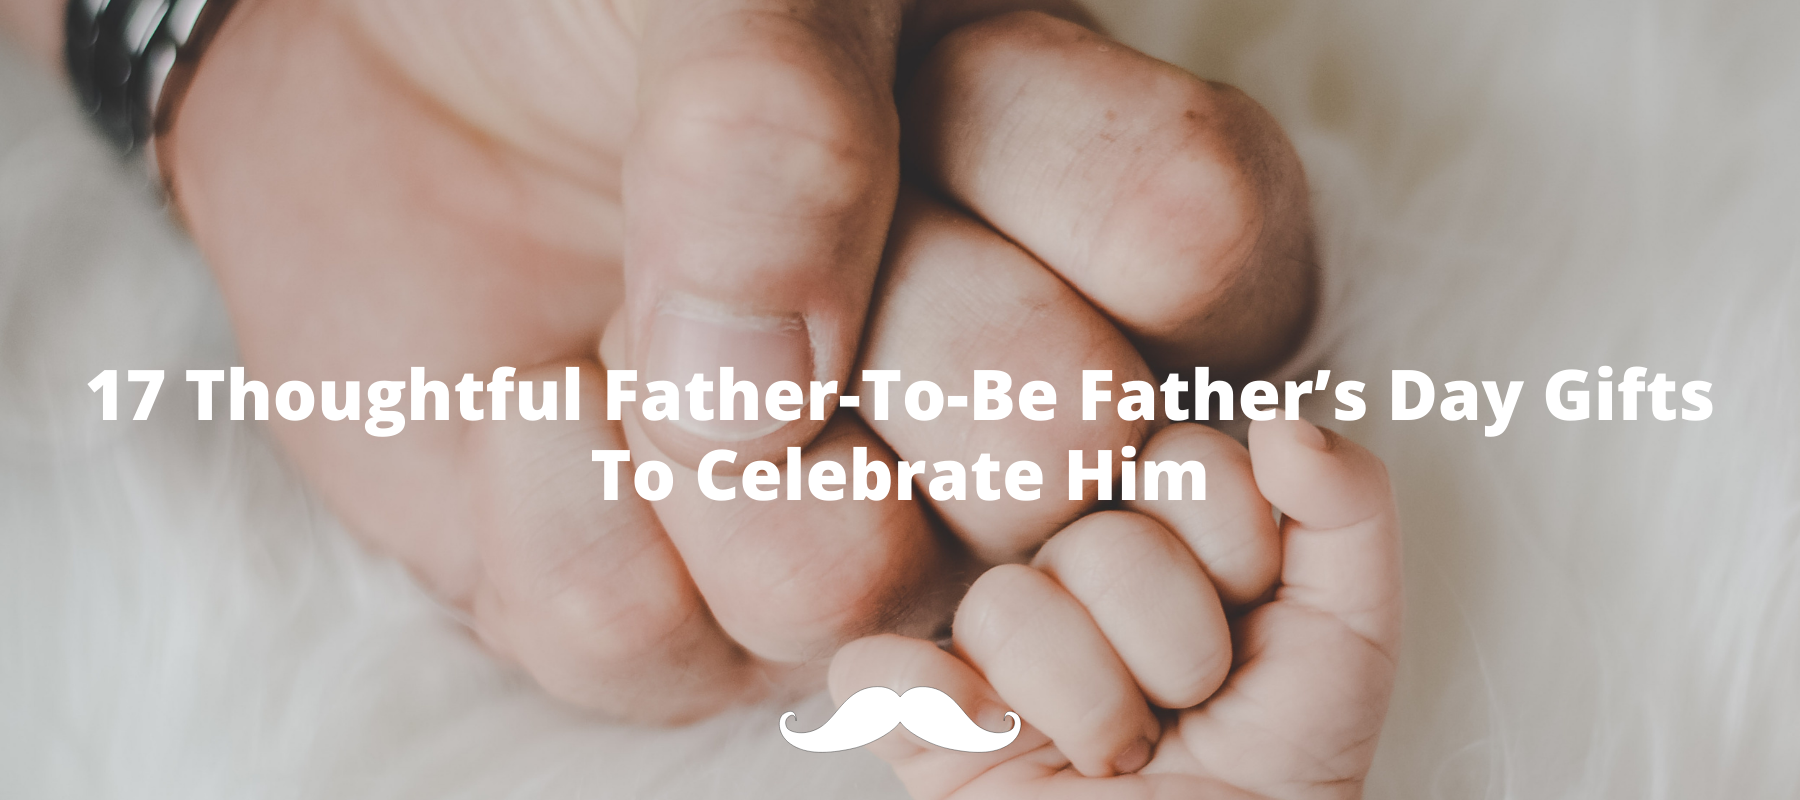 17 Thoughtful Father-To-Be Father’s Day Gifts To Celebrate Him